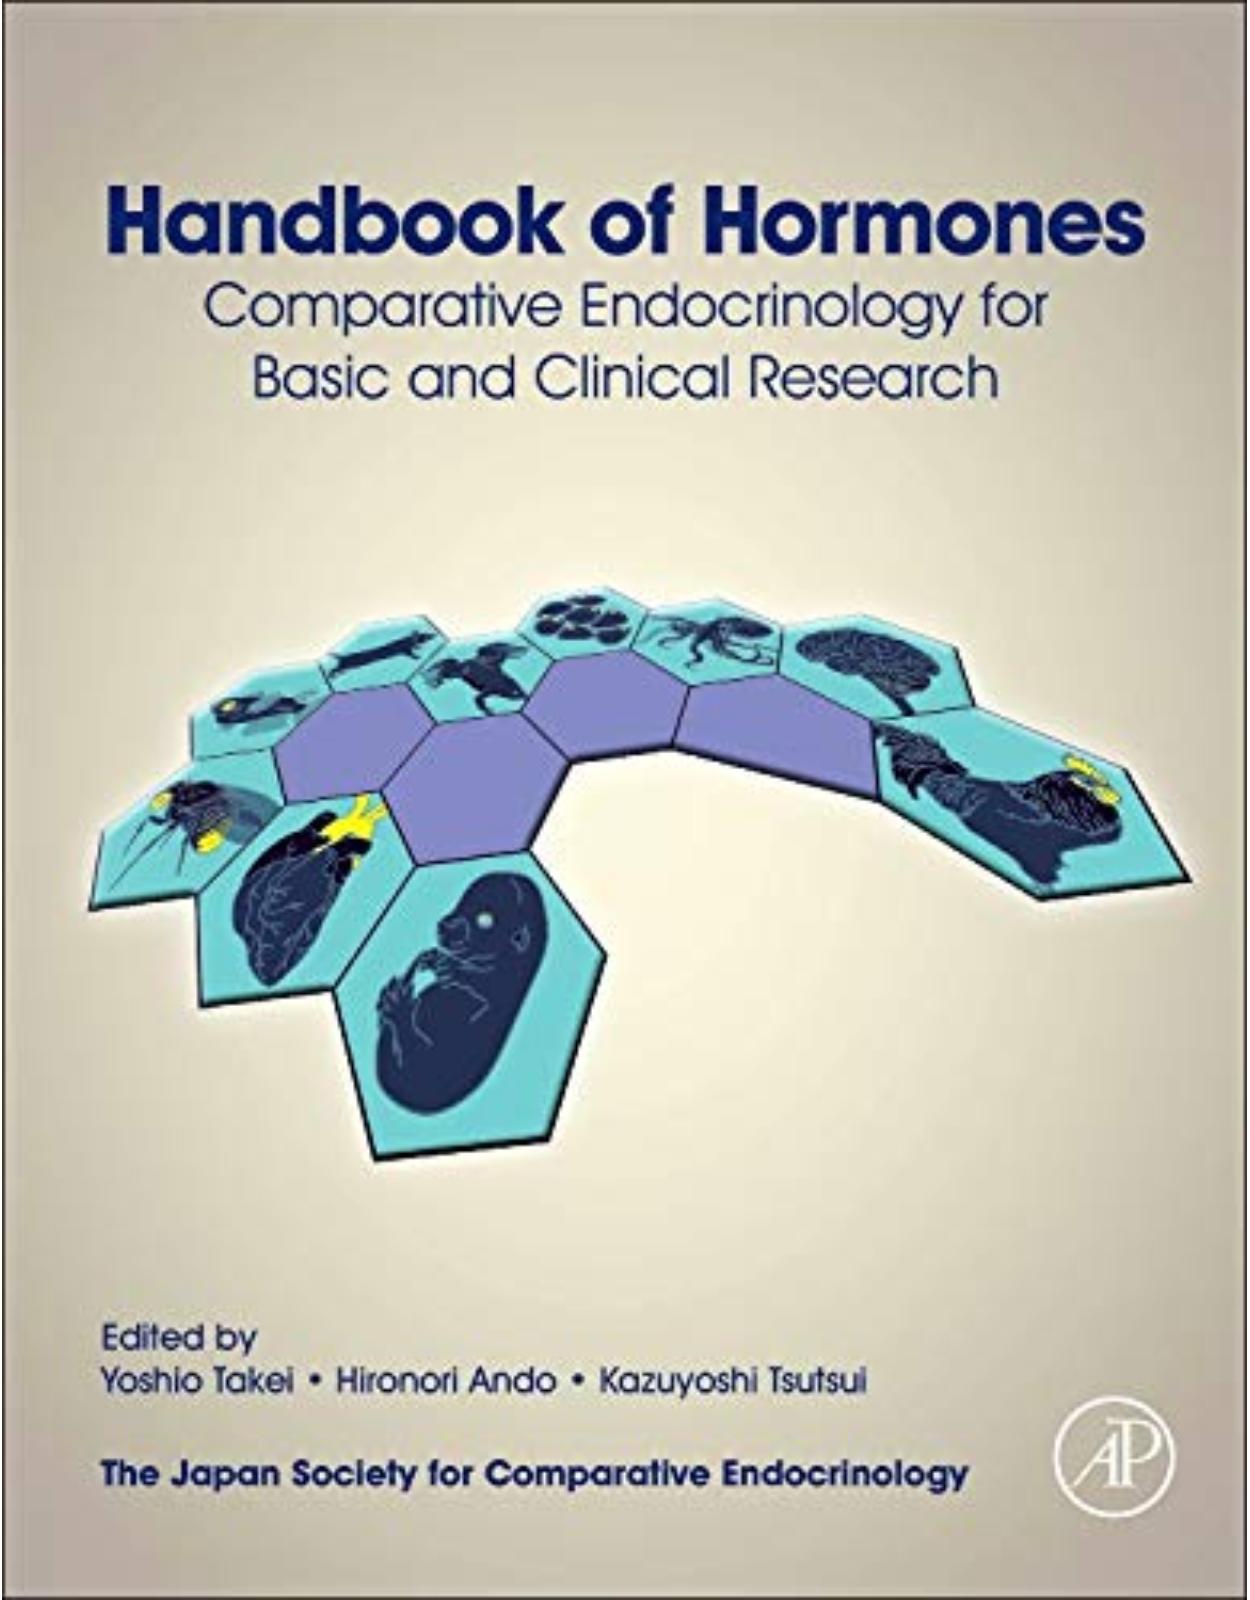 Handbook of Hormones: Comparative Endocrinology for Basic and Clinical Research 